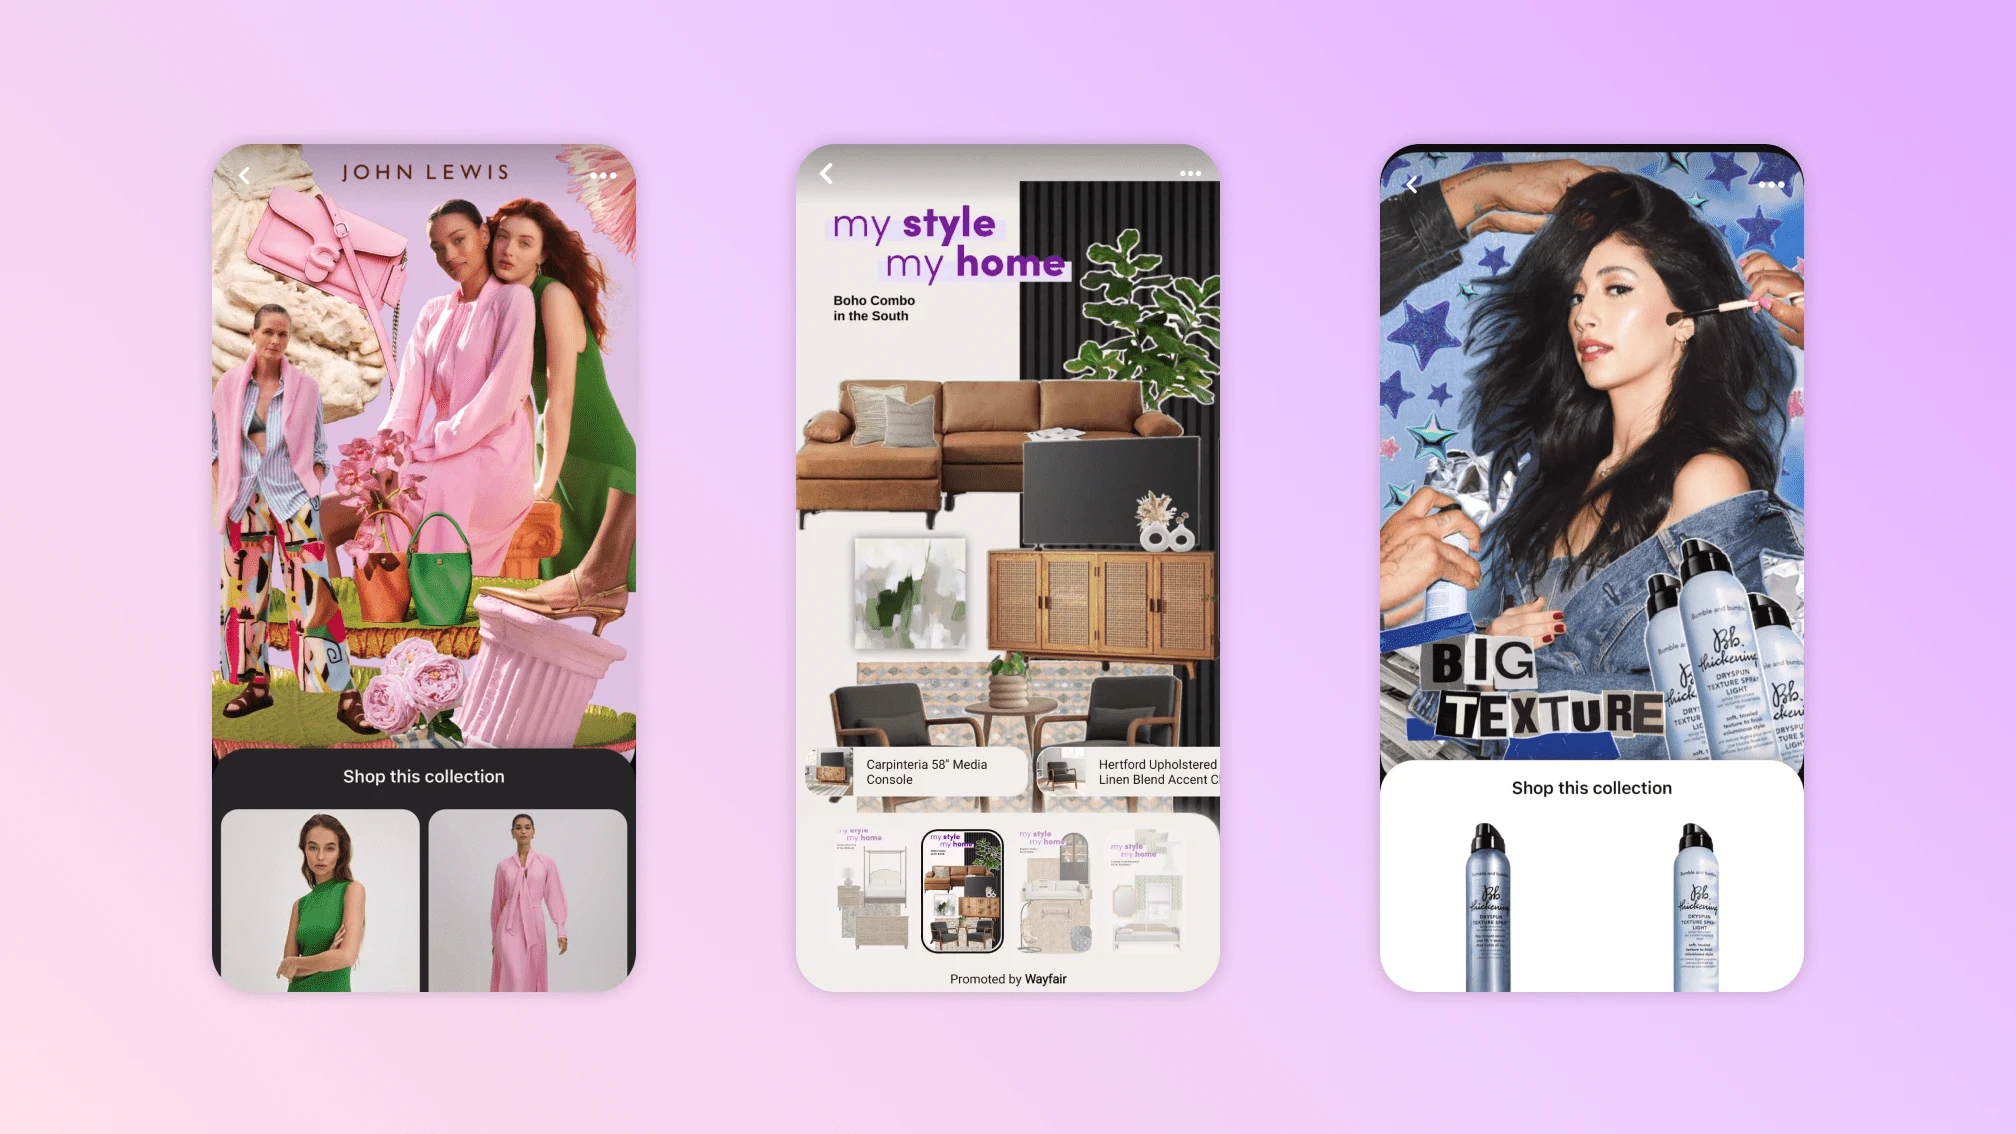 Three brands showcase collages built using our new tools: John Lewis, Wayfair, and Bumble and bumble.